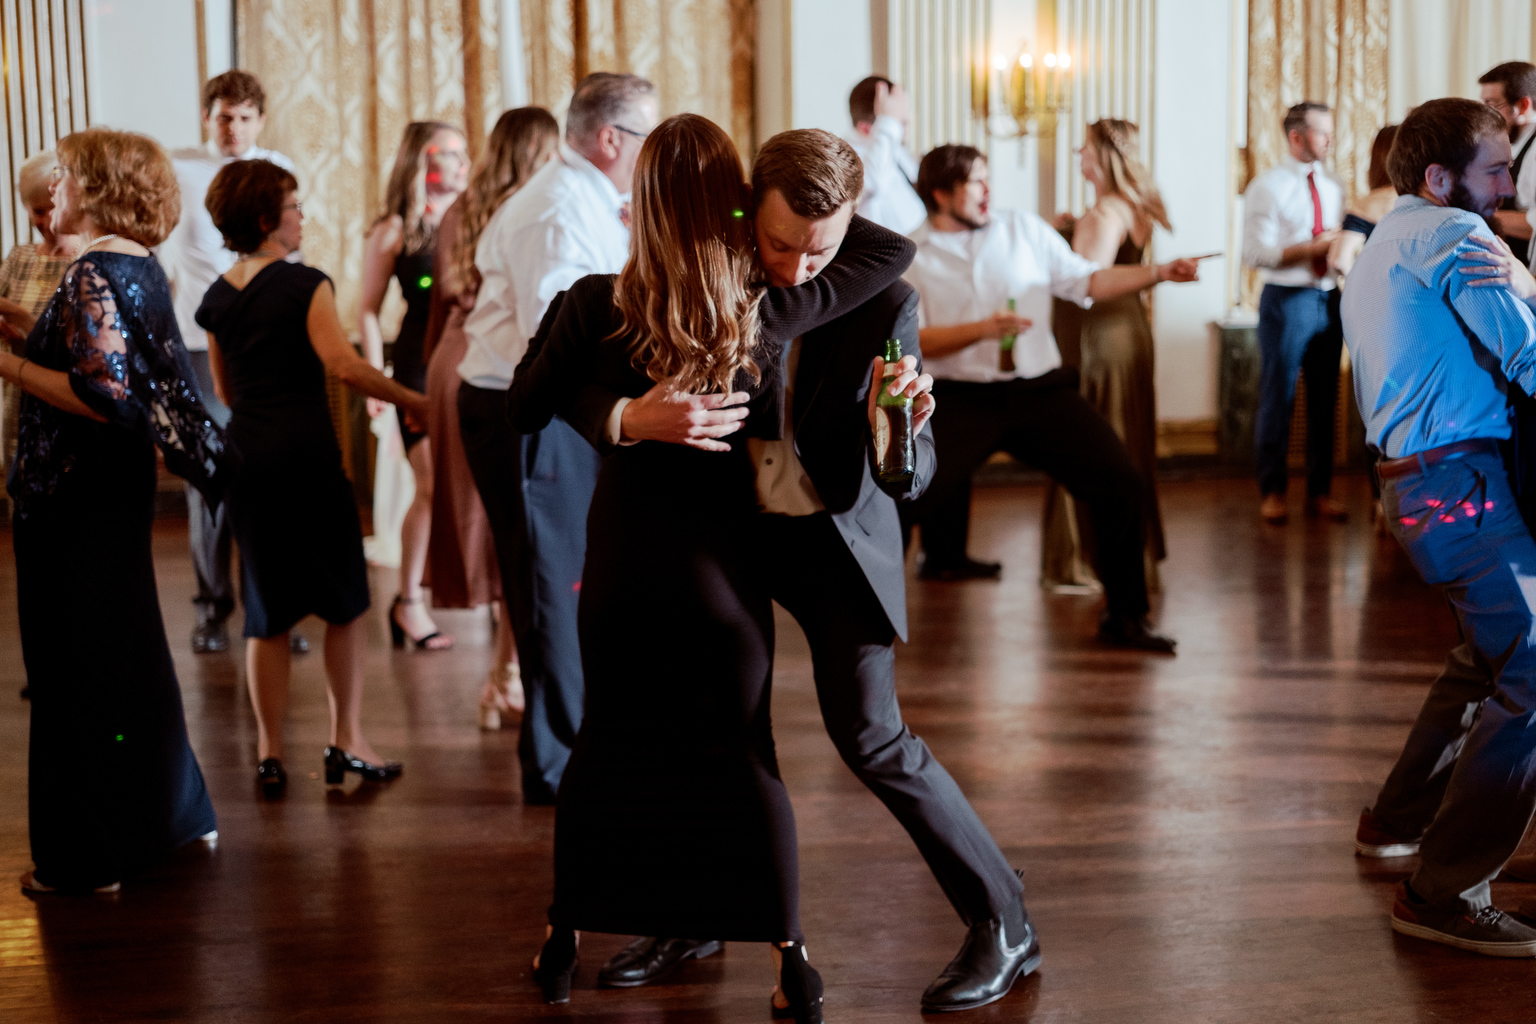 A couple dances at a wedding in an opulent room.